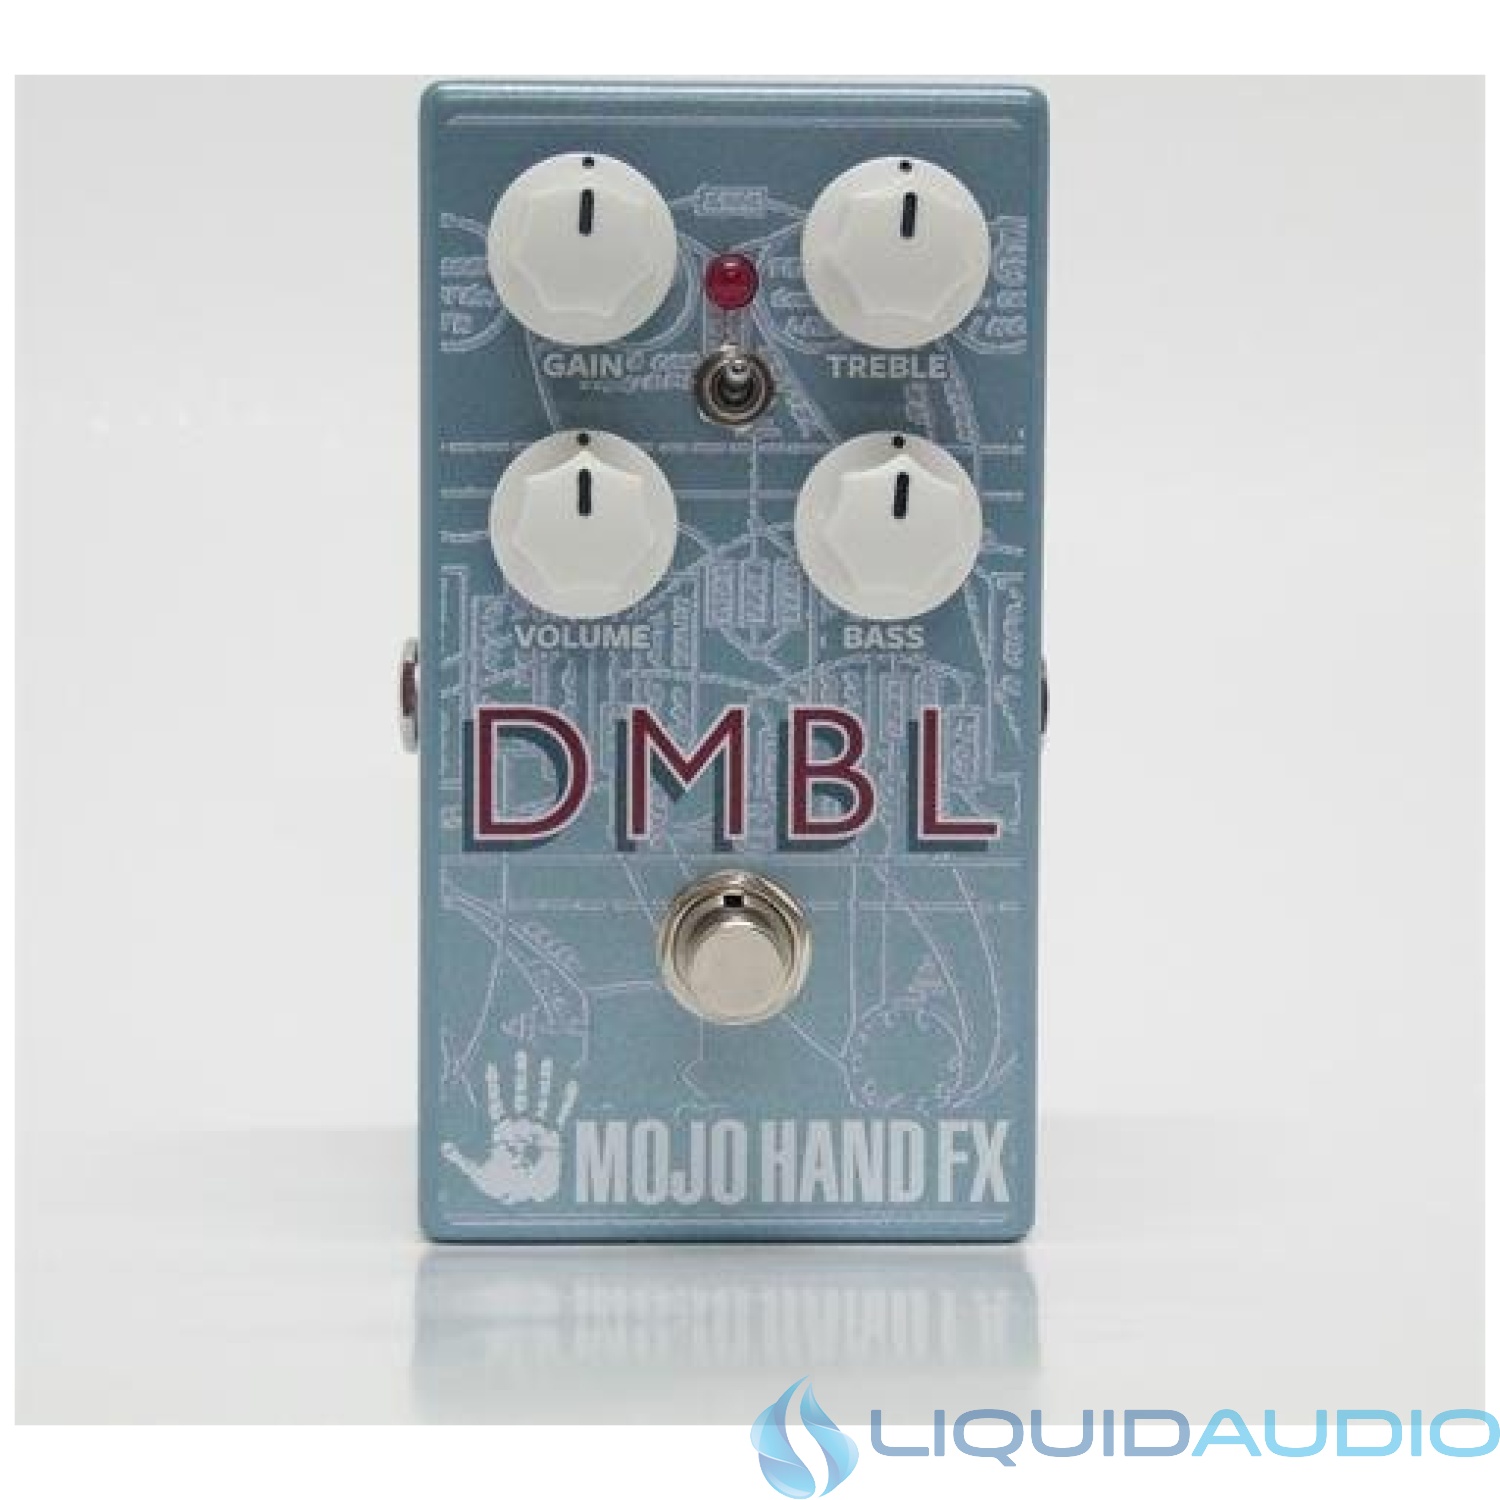 Mojo Hand FX DMBL Overdrive Guitar Effects Pedal